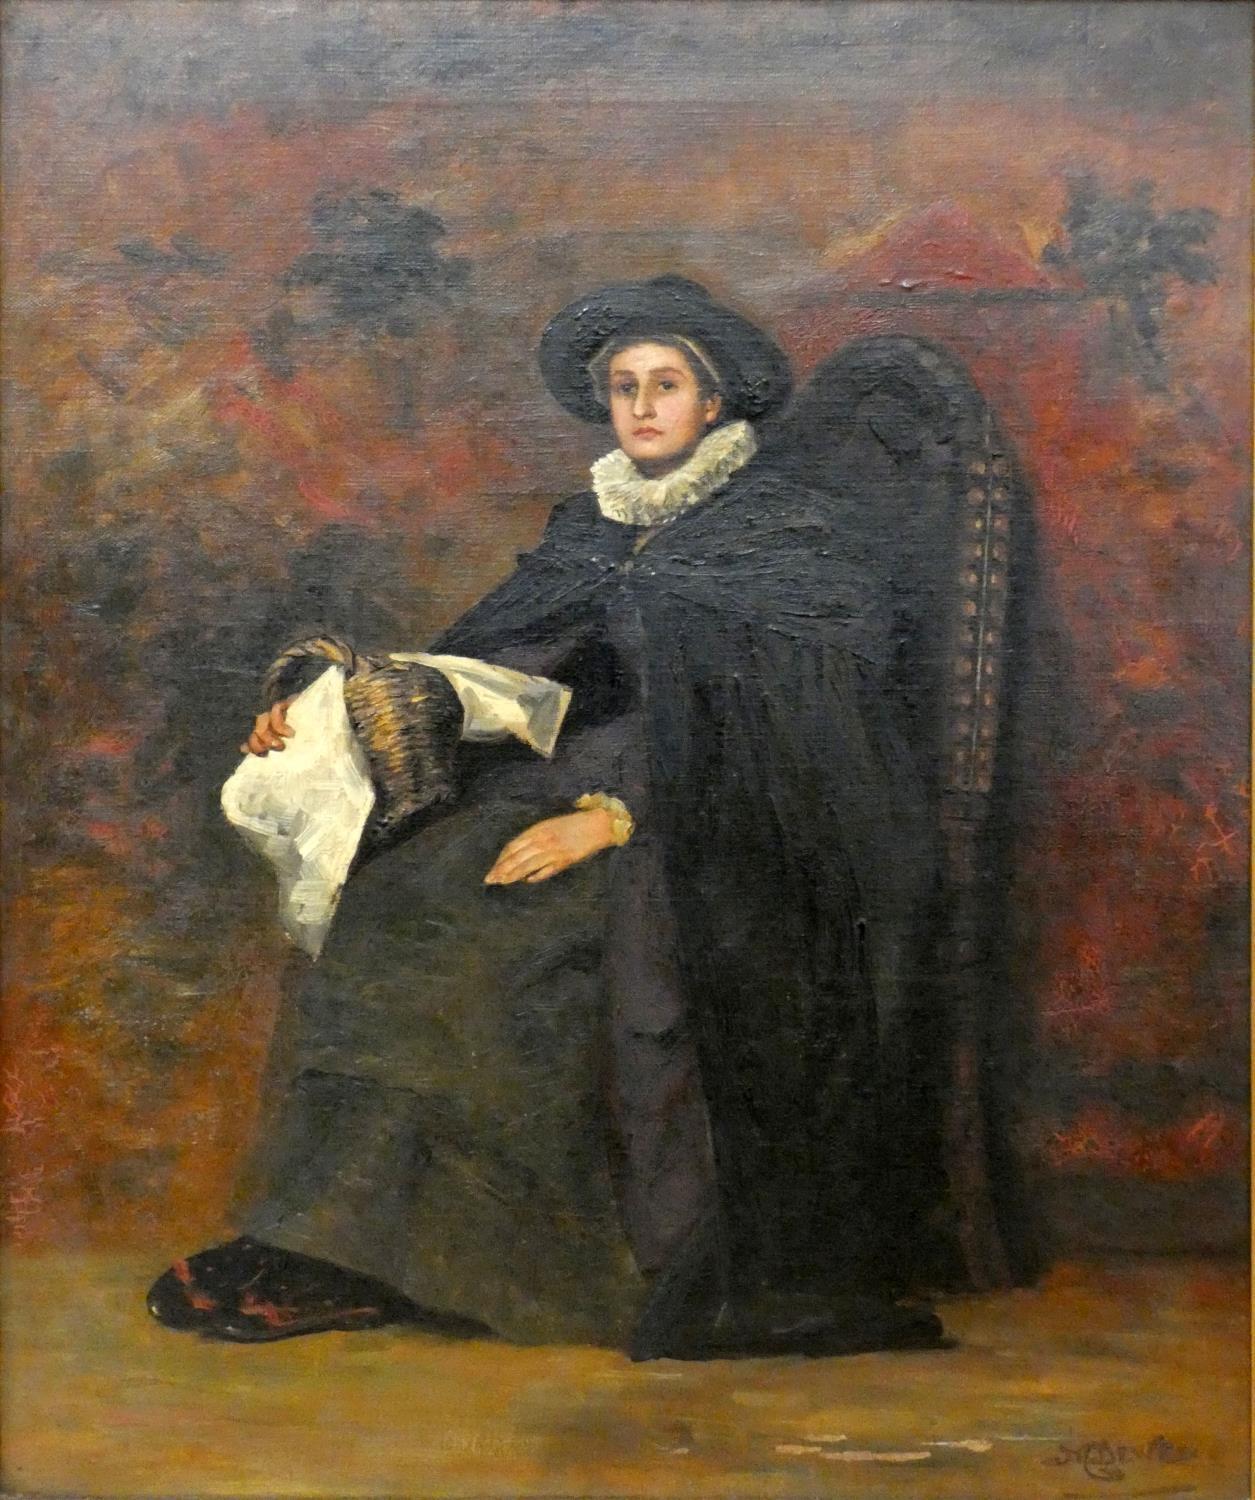 19th century Continental school, lady with white ruff, signed indistinctly, oil on canvas, 50 x 40